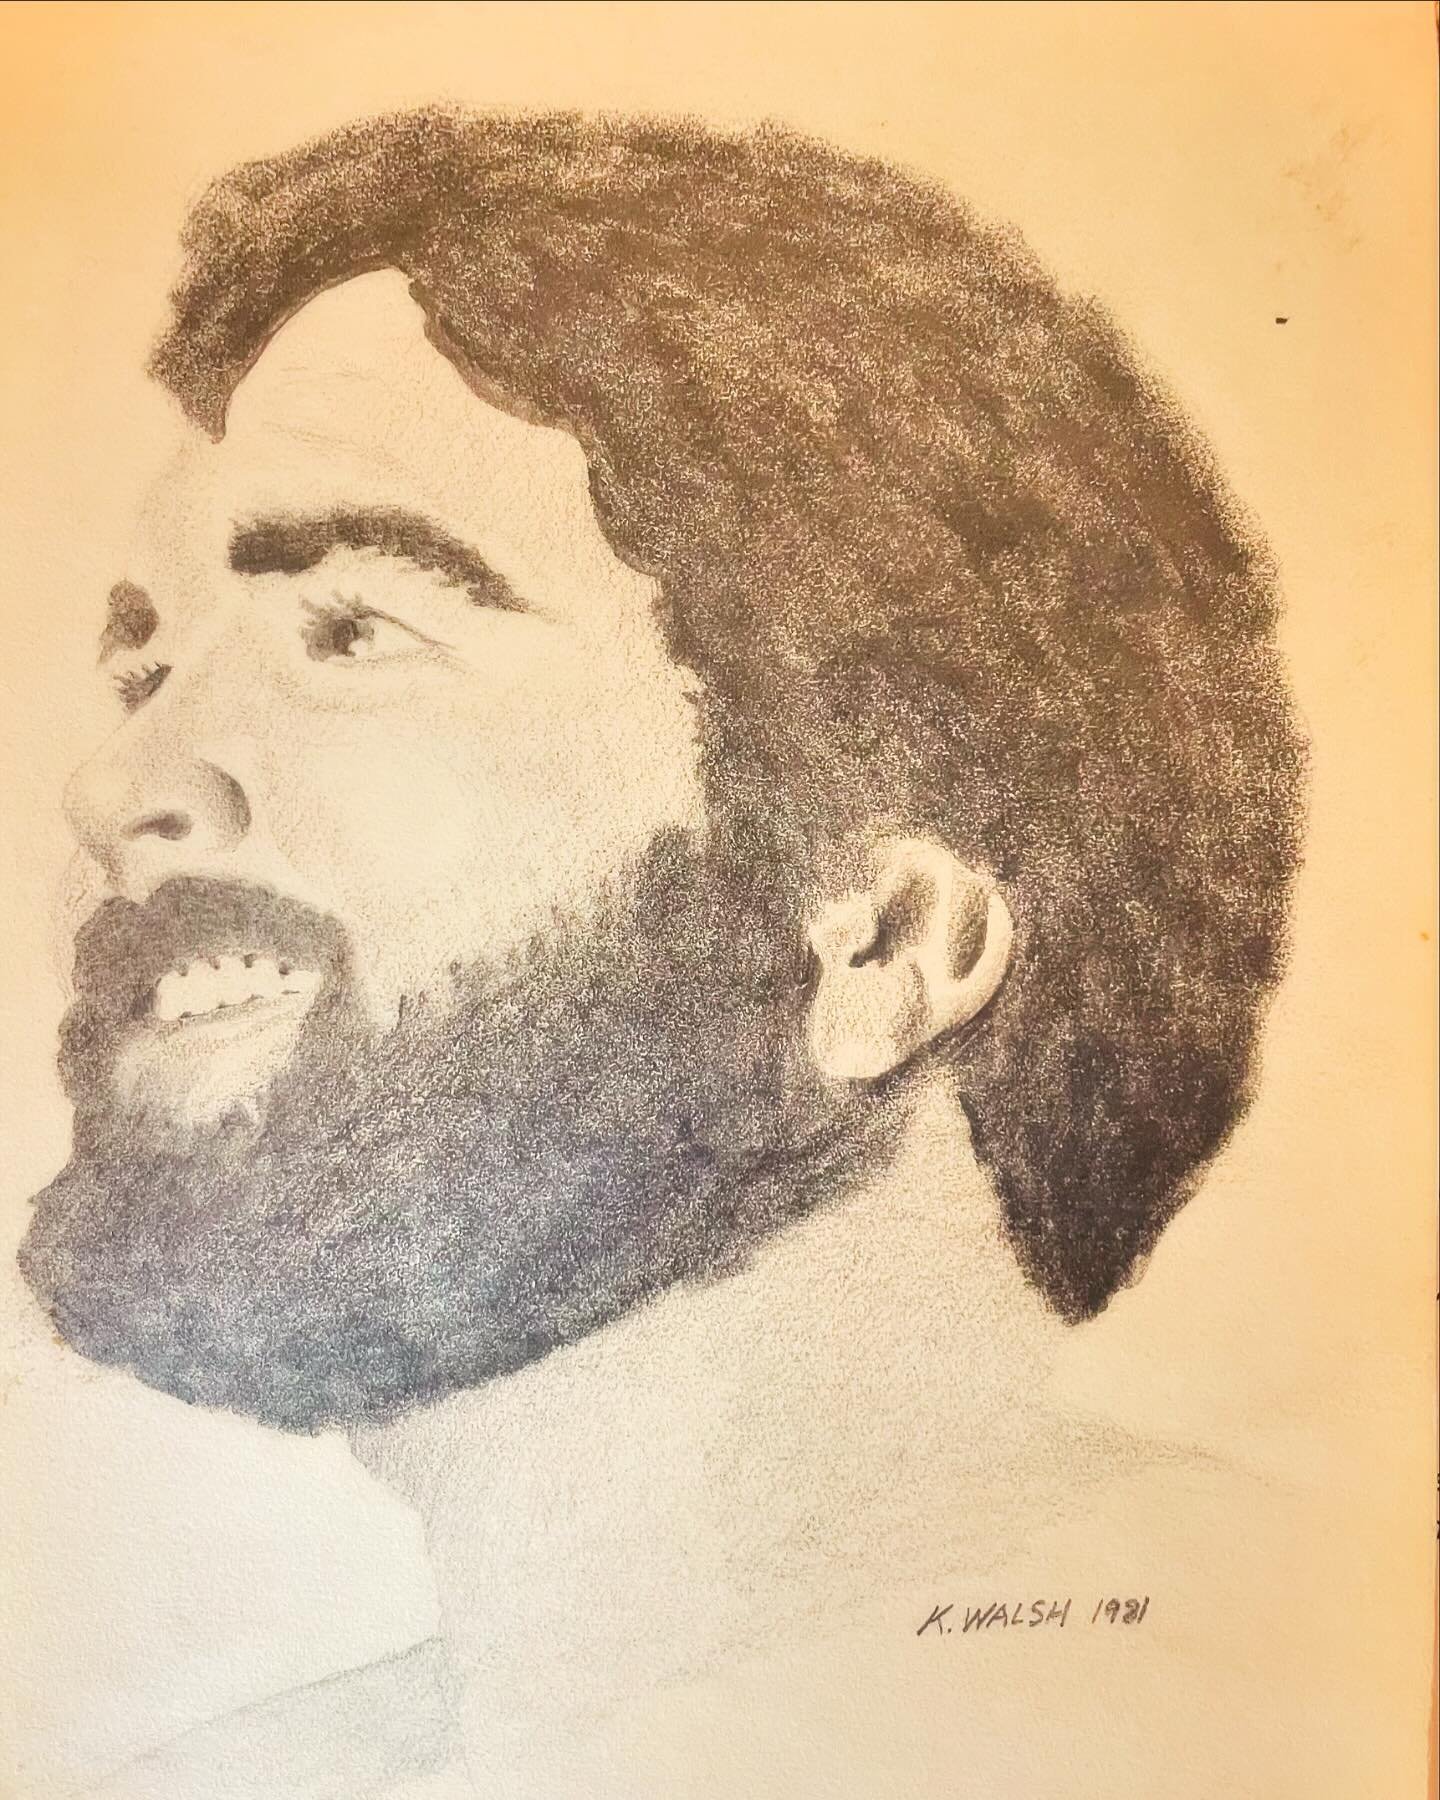 Found this old portrait of me in archives boxes. A strange and fun flashback to 1981. #portrait #archives #selfawareness #this #flashback #selfreflection #ronaldchapman